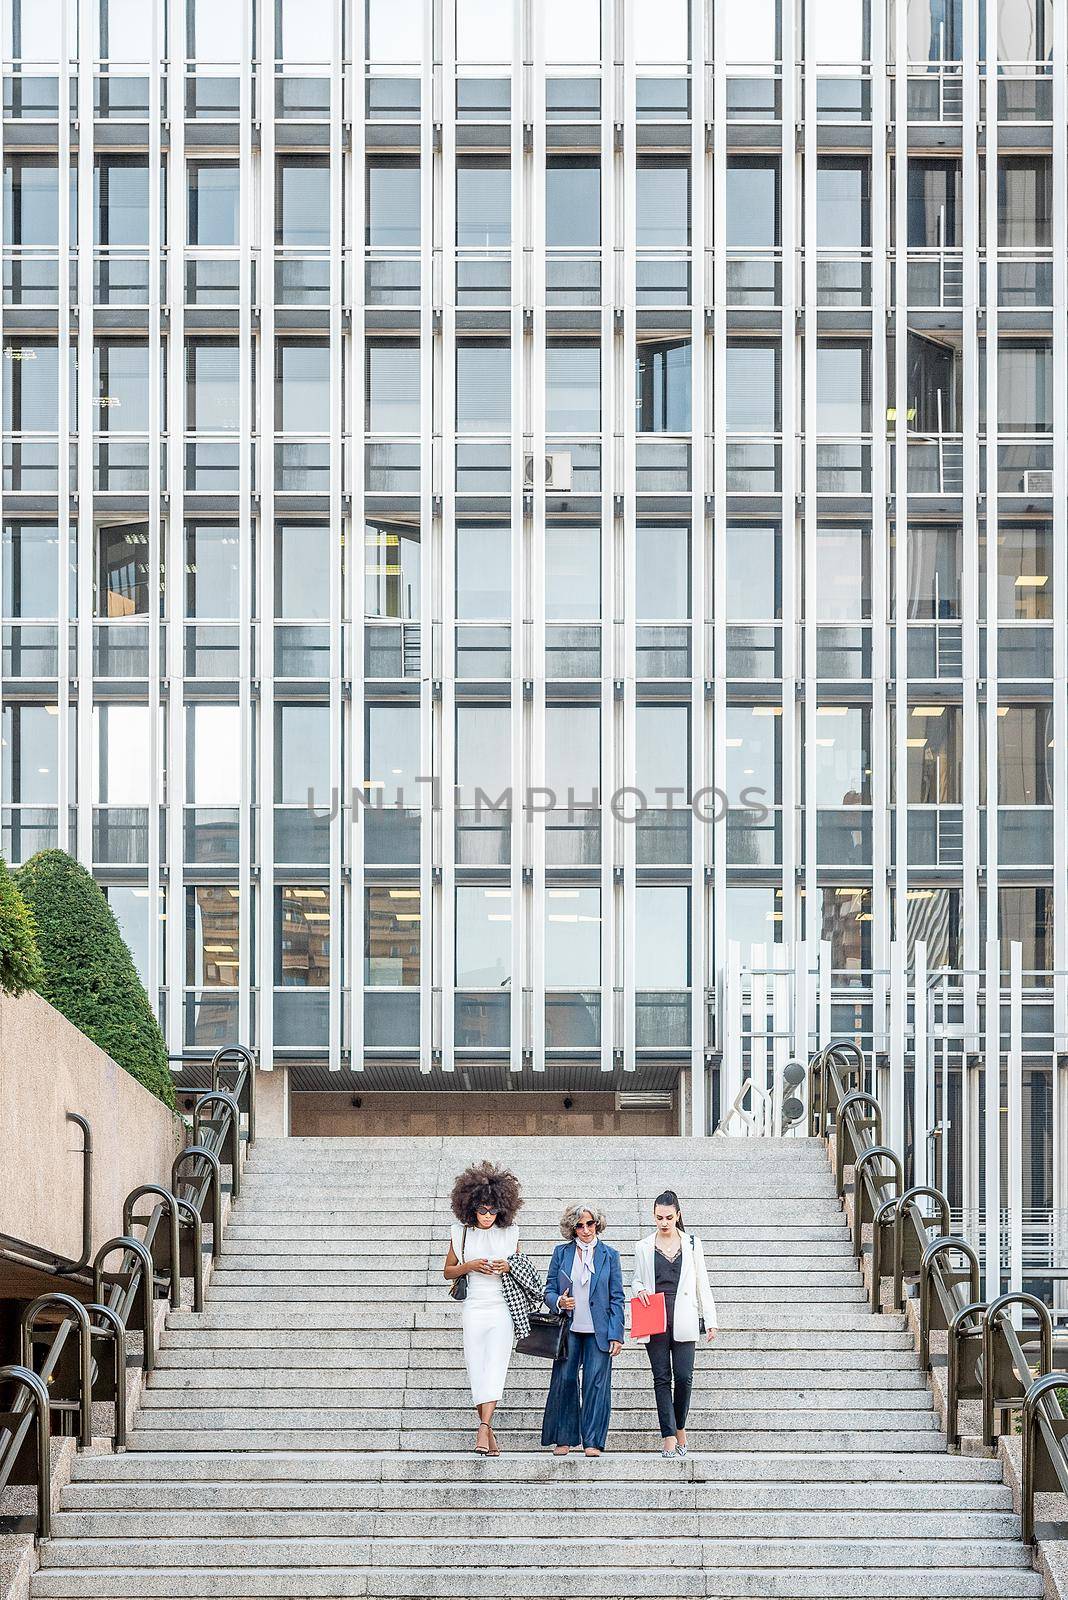 women entrepreneurs walking down the stairs after work, vertical background